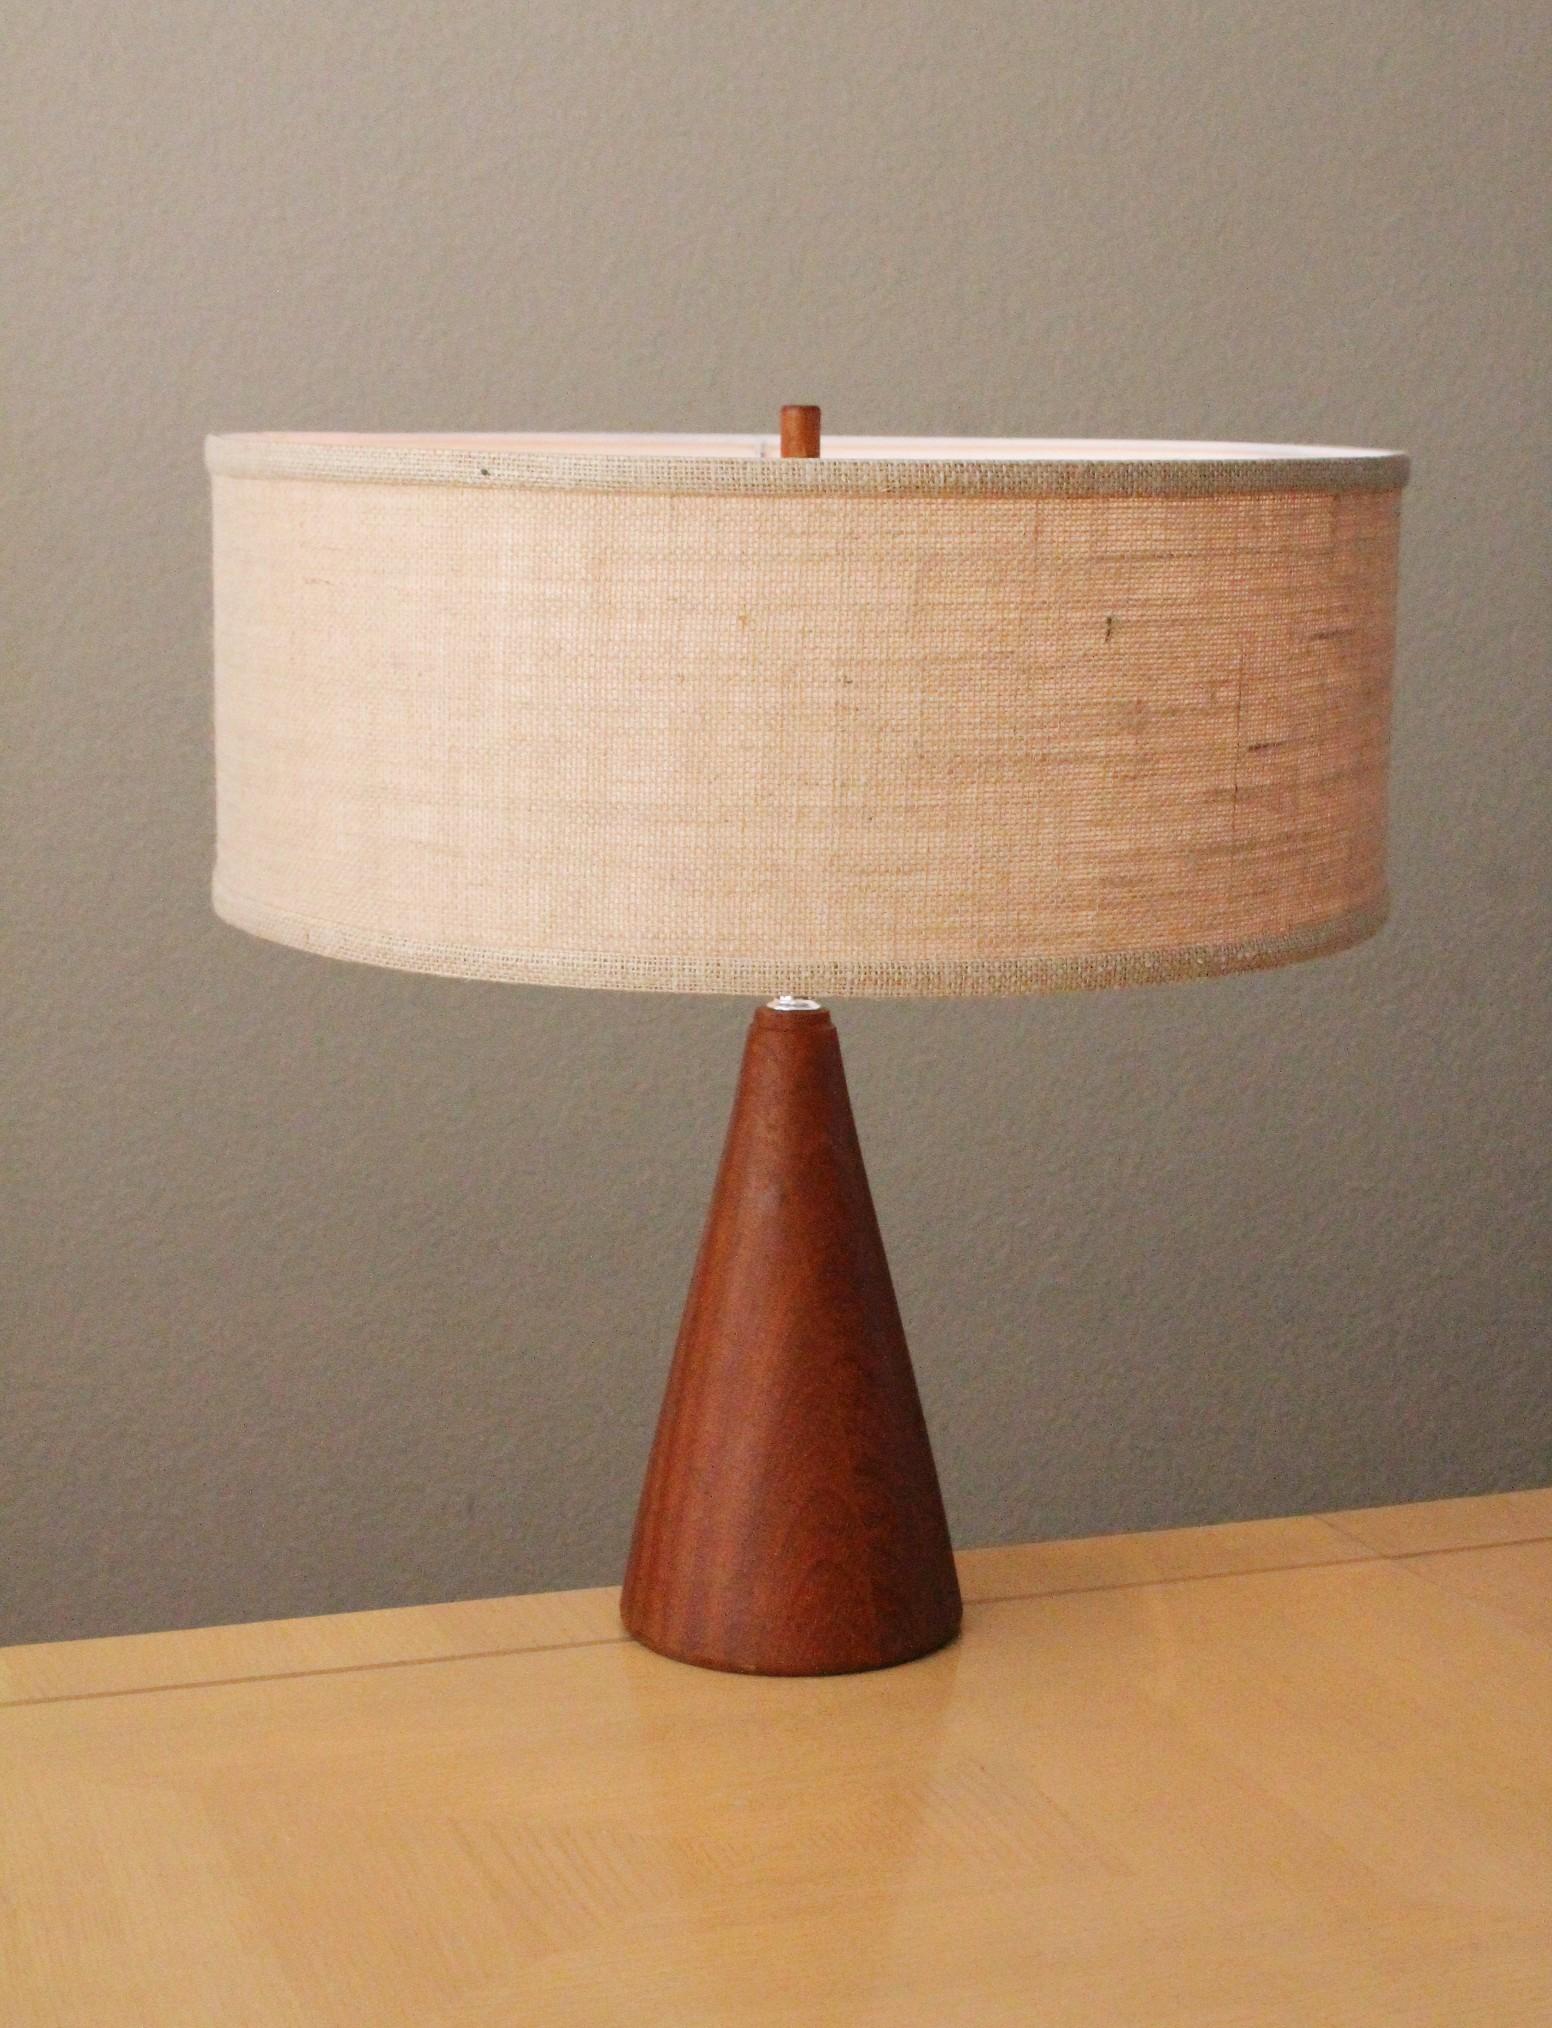 SOLID TEAK
DANISH MODERN
TABLE LAMP!

MAGNIFICENT STYLE!

( DIMENSIONS: 32